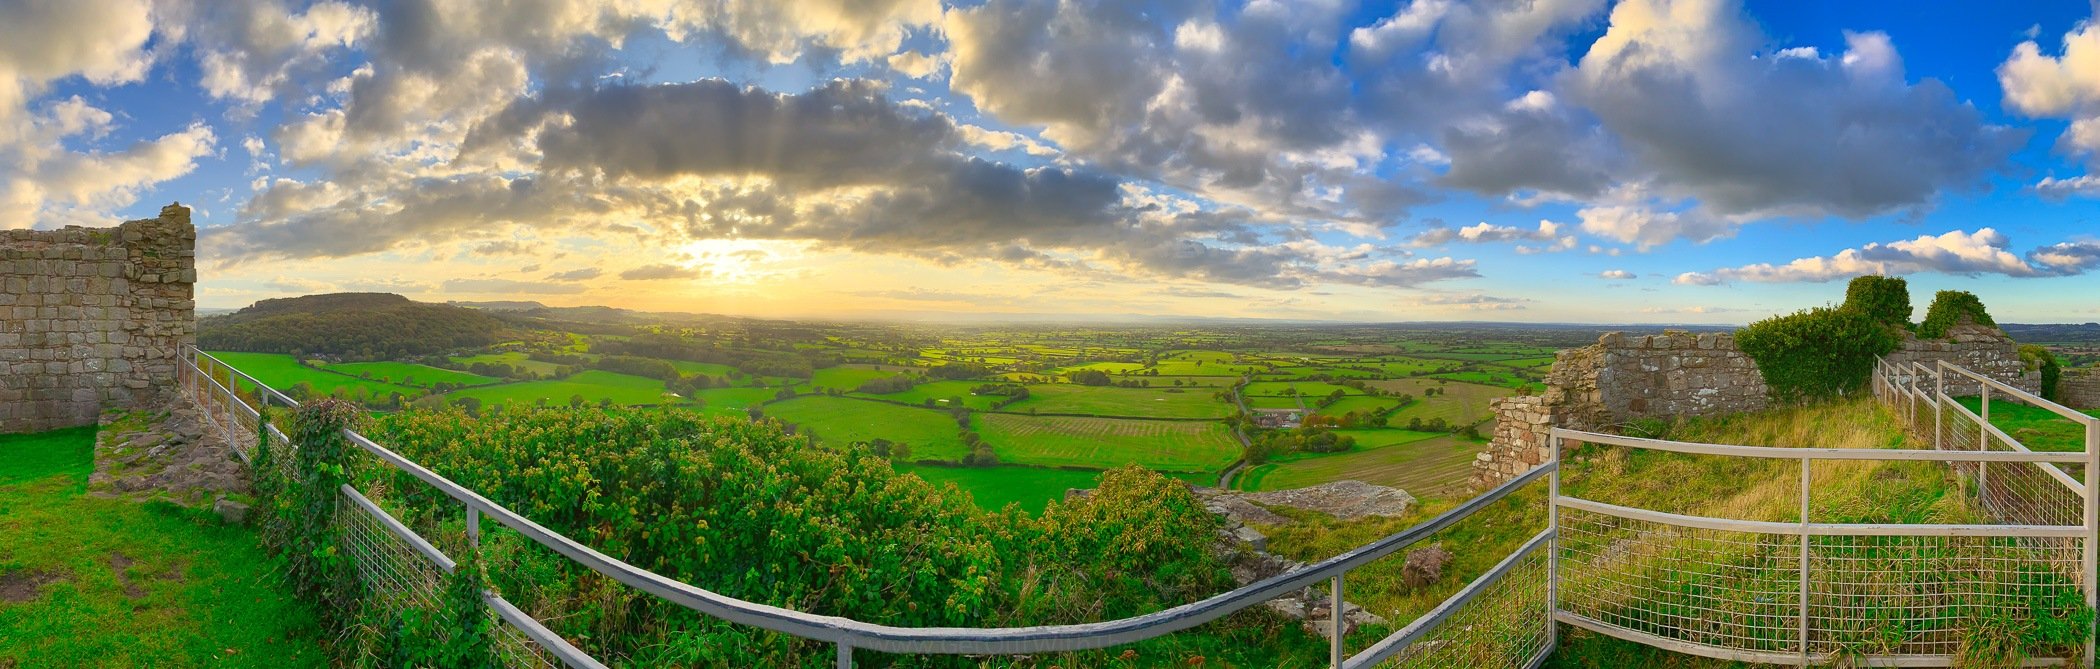 Panorama from the top of Beeston Castle